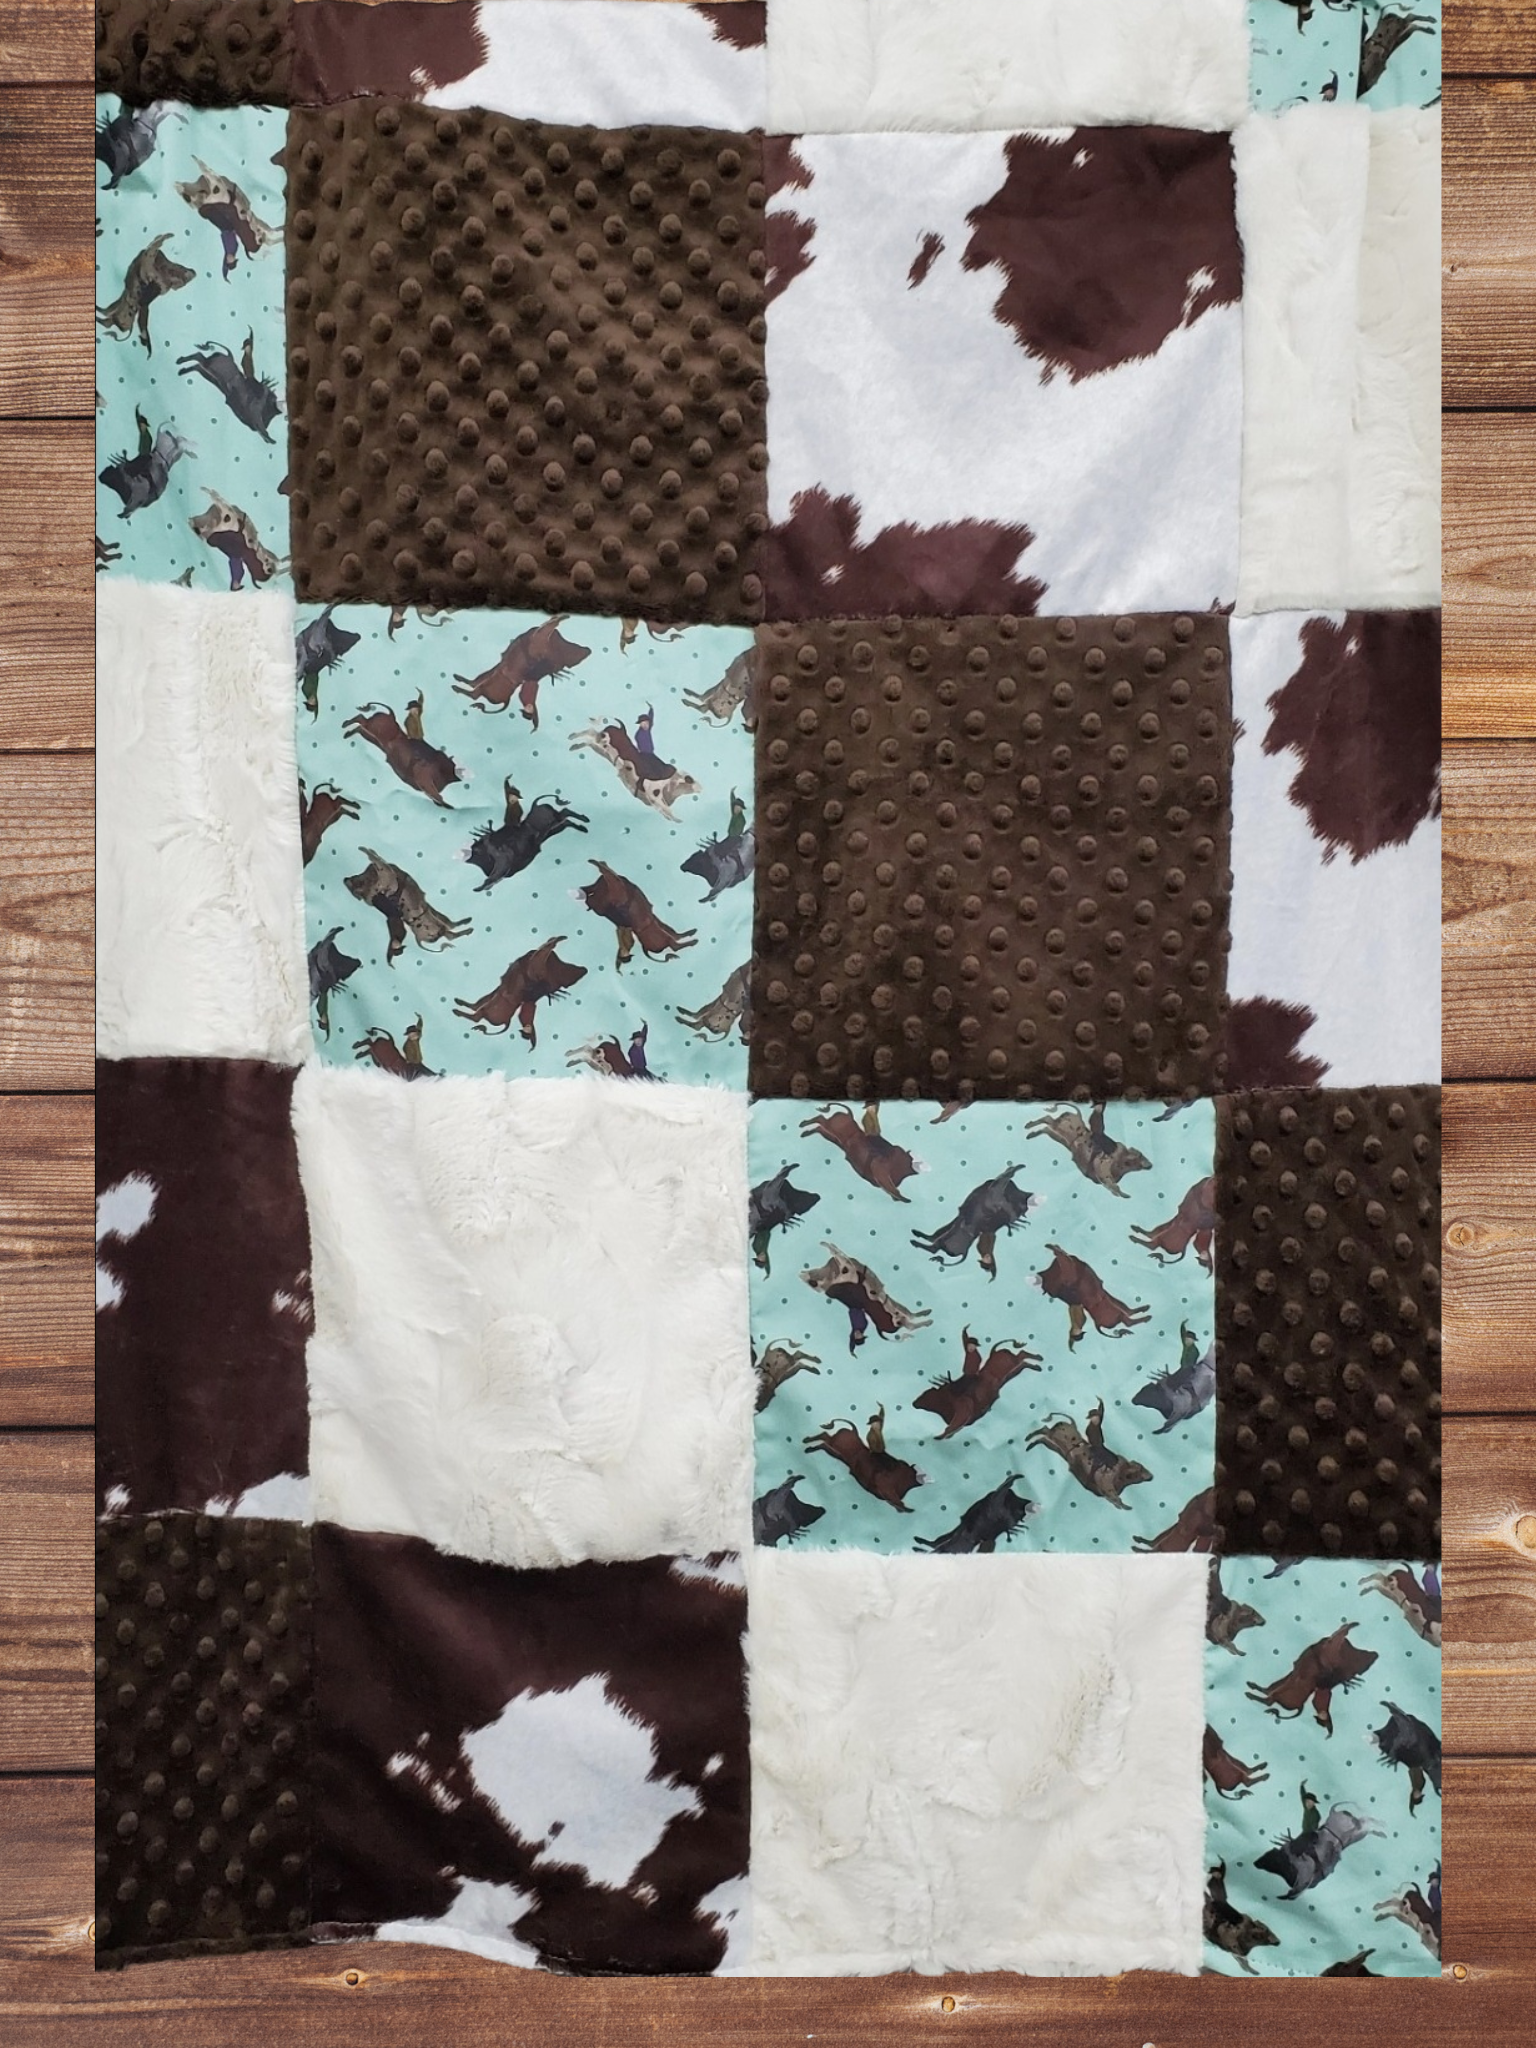 Patchwork Blanket - Bull Riding Rodeo and Calf Minky Blanket - DBC Baby Bedding Co 